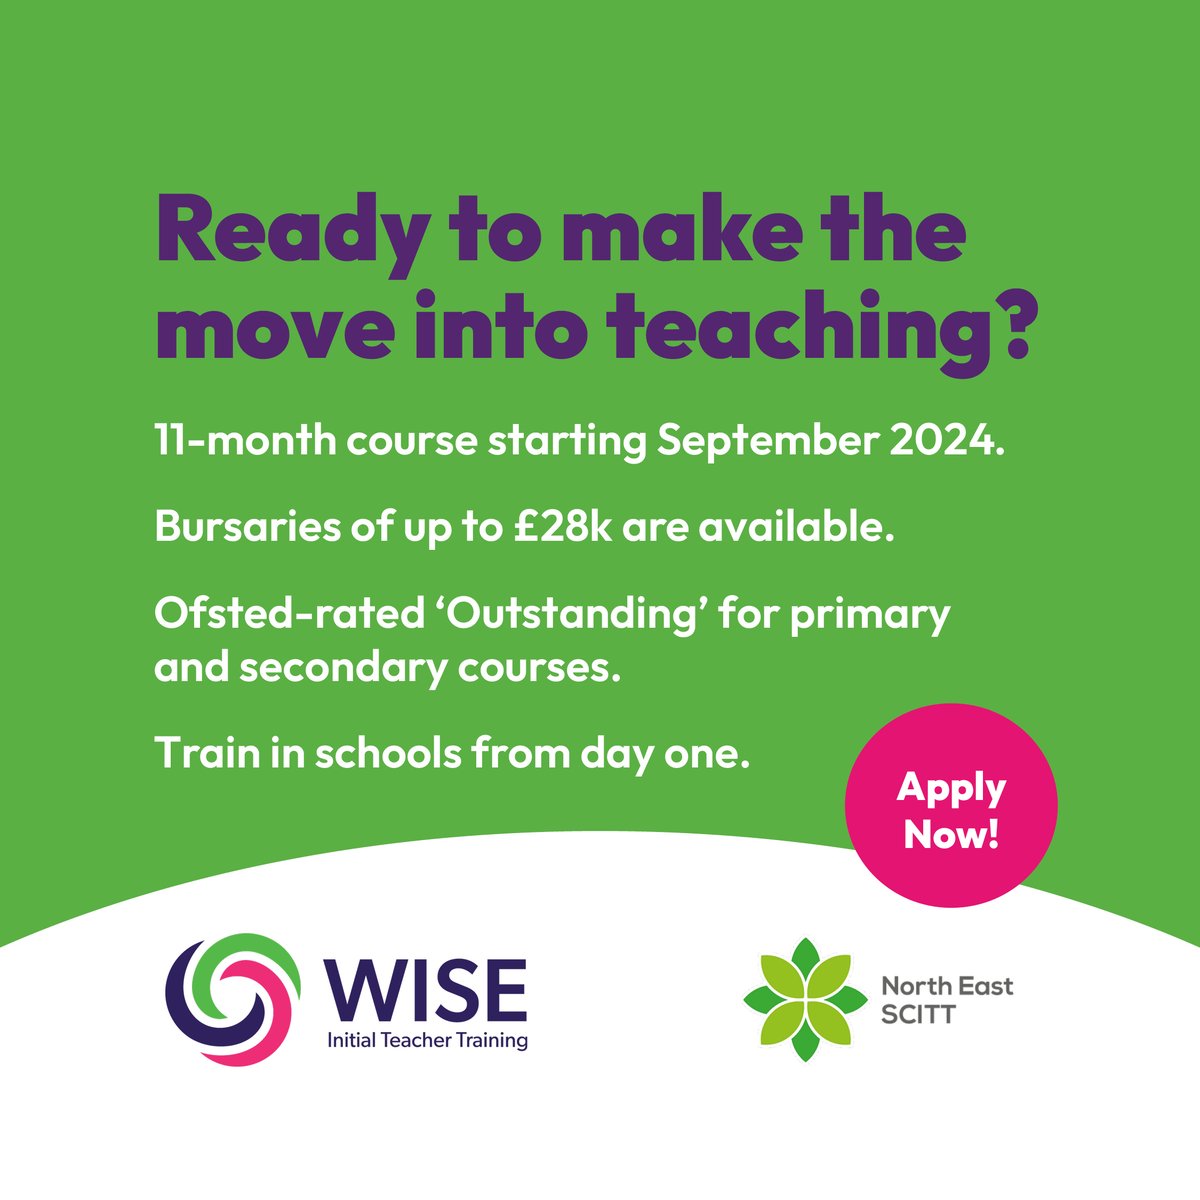 Applications for our school-led Initial Teacher training programmes in collaboration with @NorthEastSCITT are now open 📚 Get in touch today to find out more ✉️traintoteach@wiseitt.com 📱0191 7070 125 #ITT #teachertraining #getintoteaching